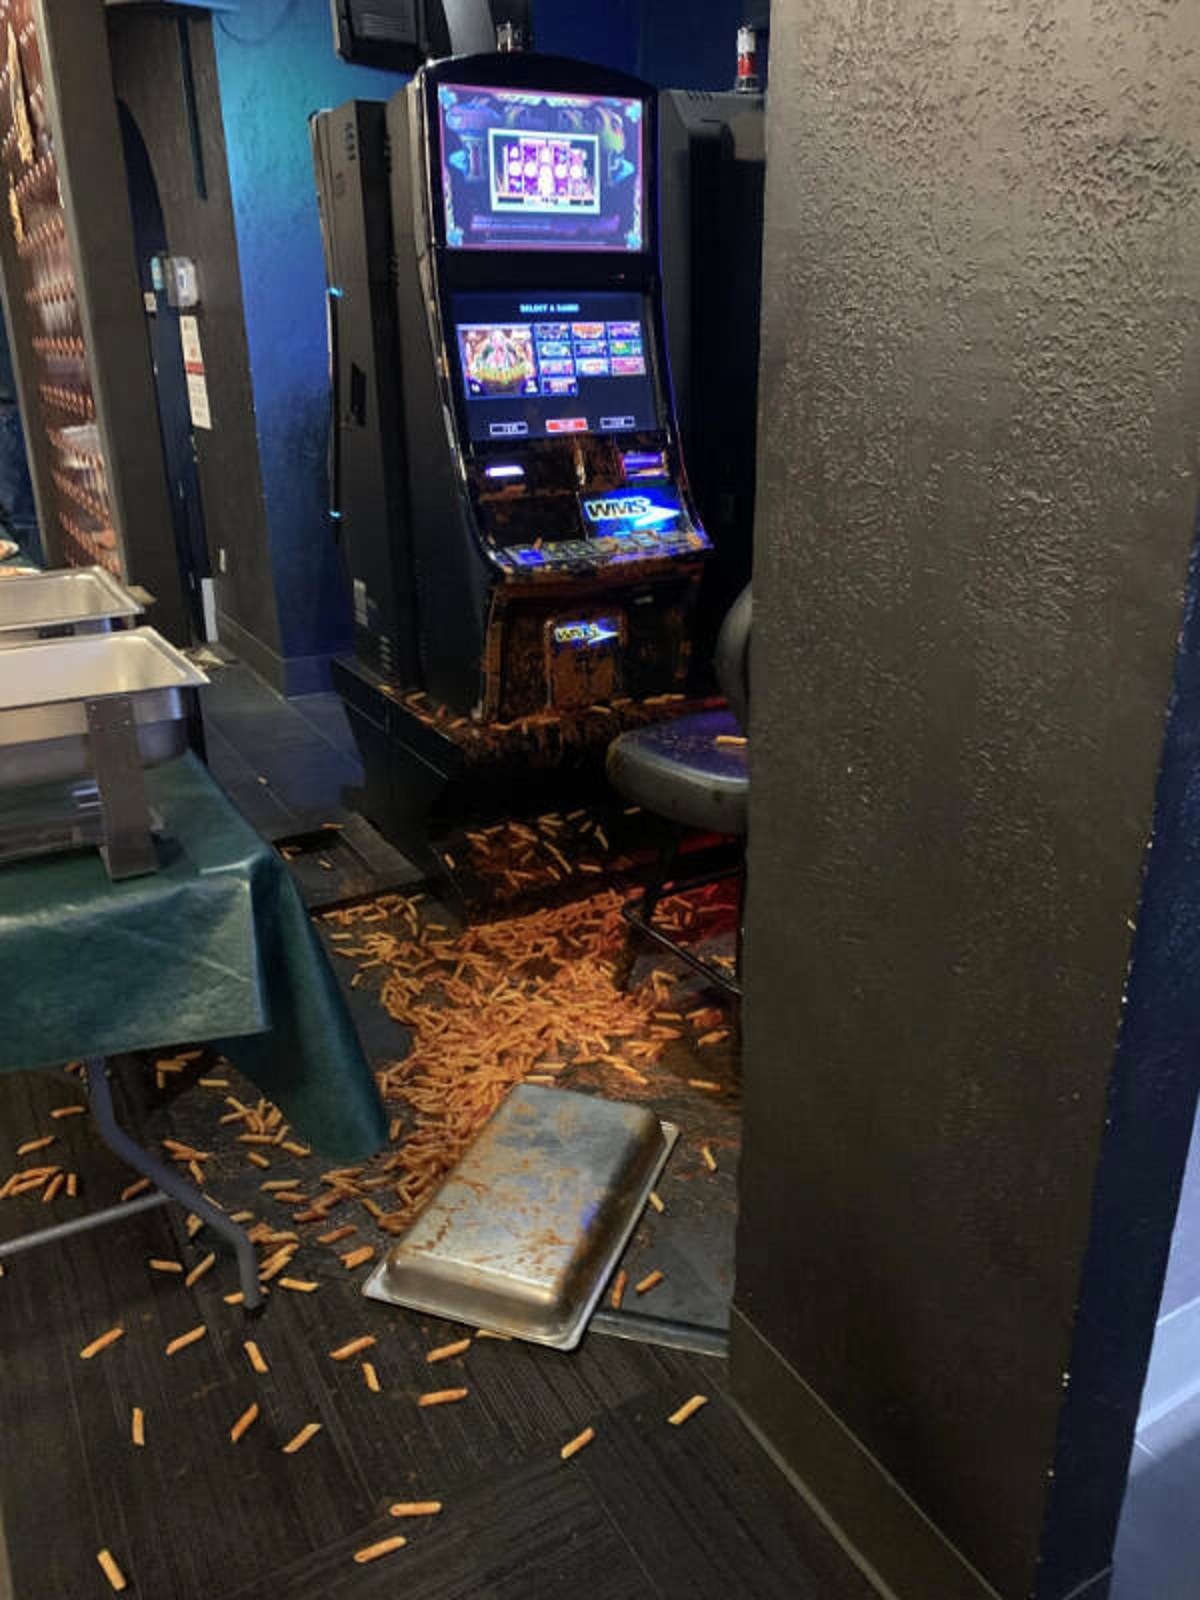 "Slots and pasta don’t mix."